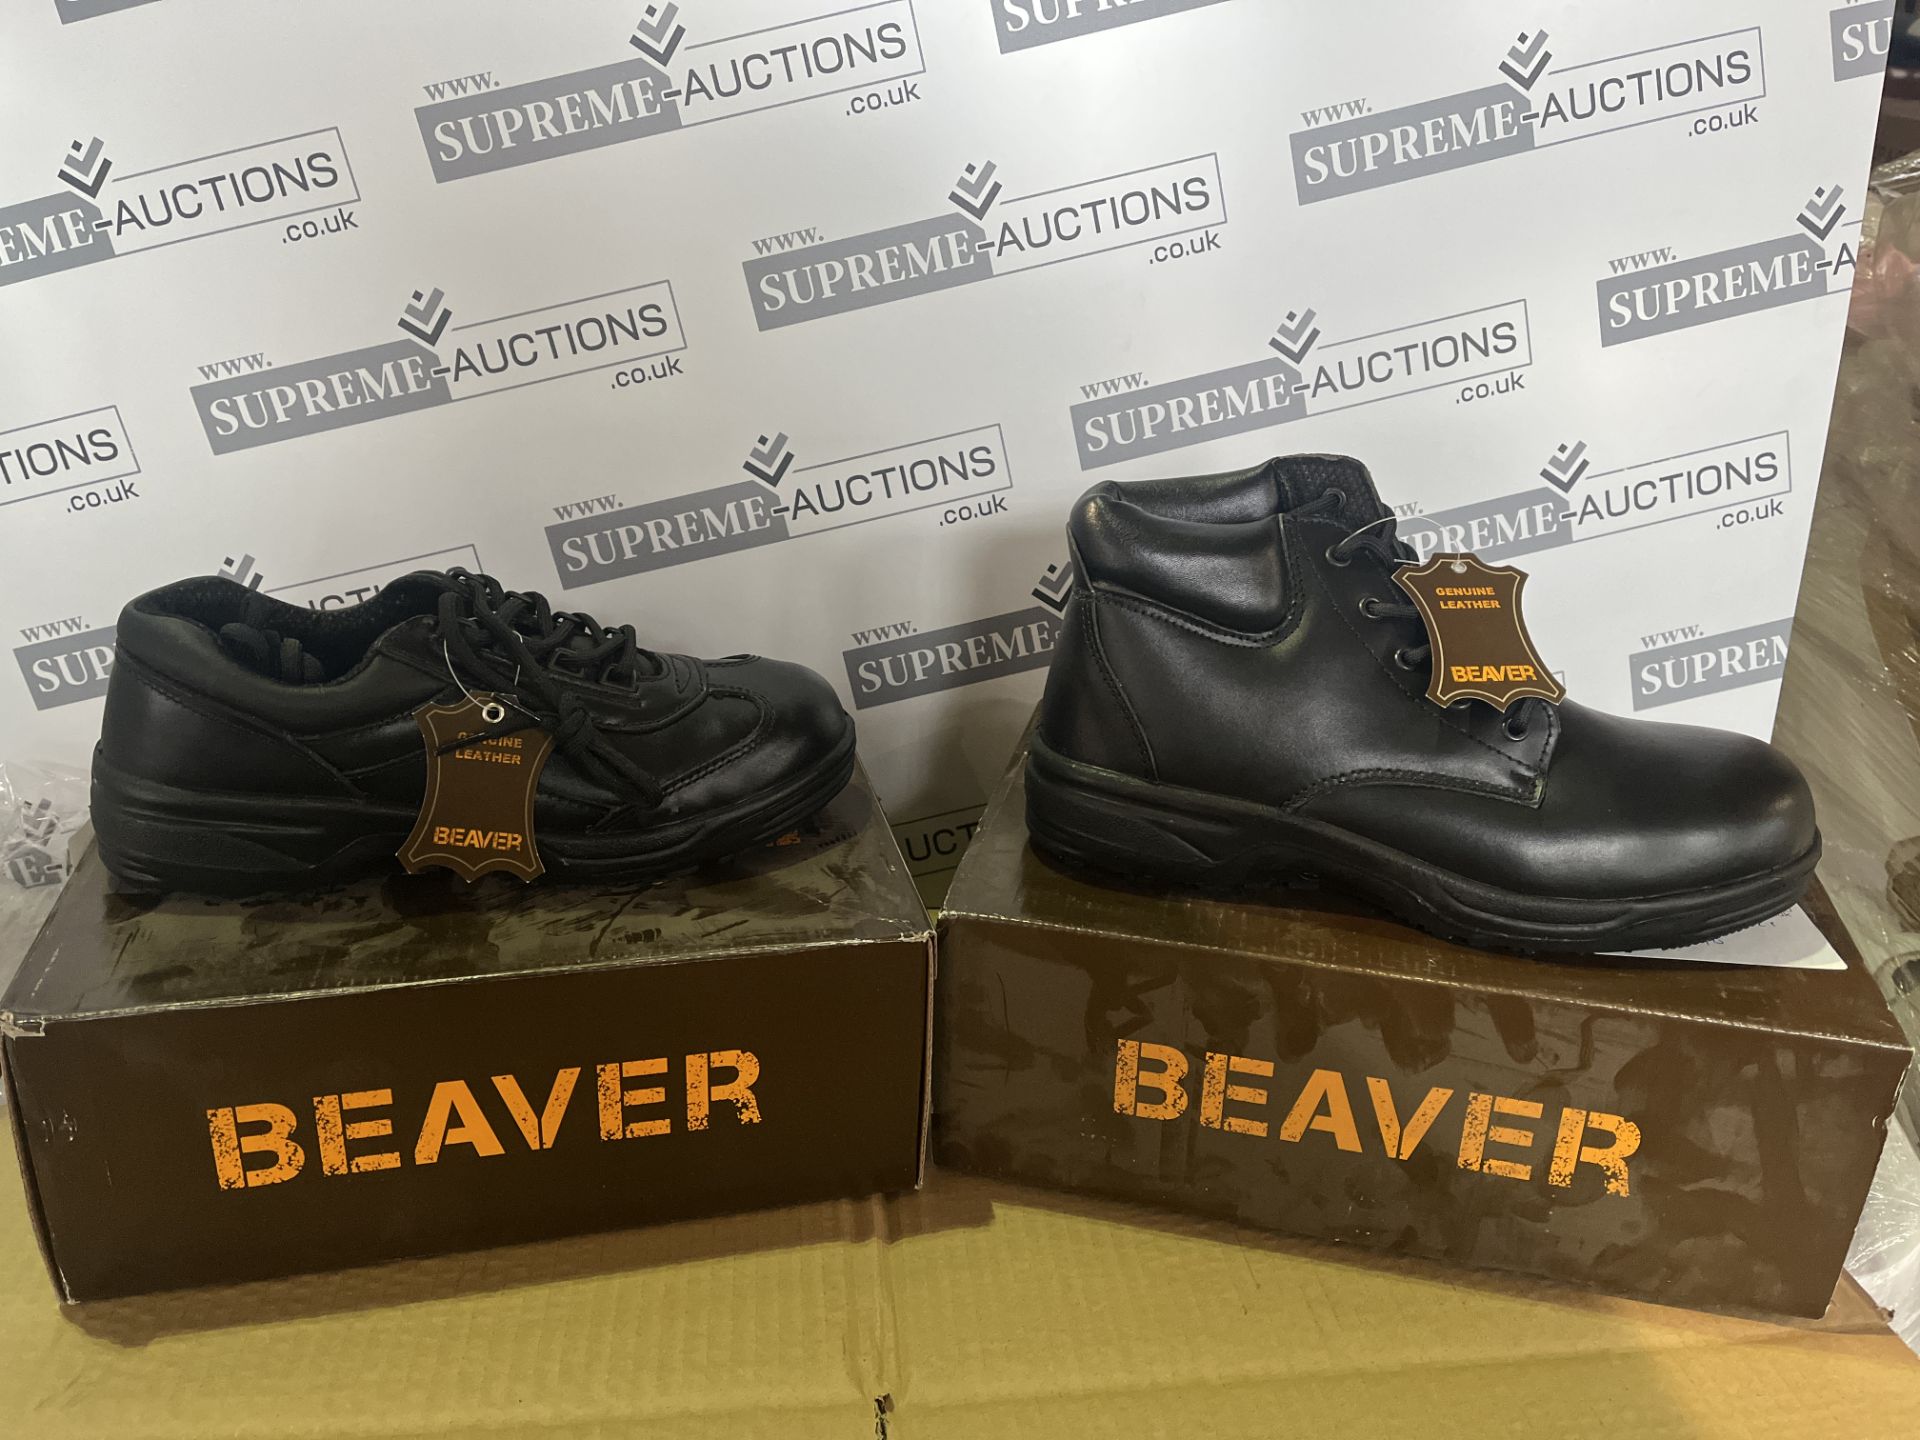 5 X BRAND NEW BEAVER PROFESSIONAL WORK BOOTS IN VARIOUS STYLES AND SIZES R15-8